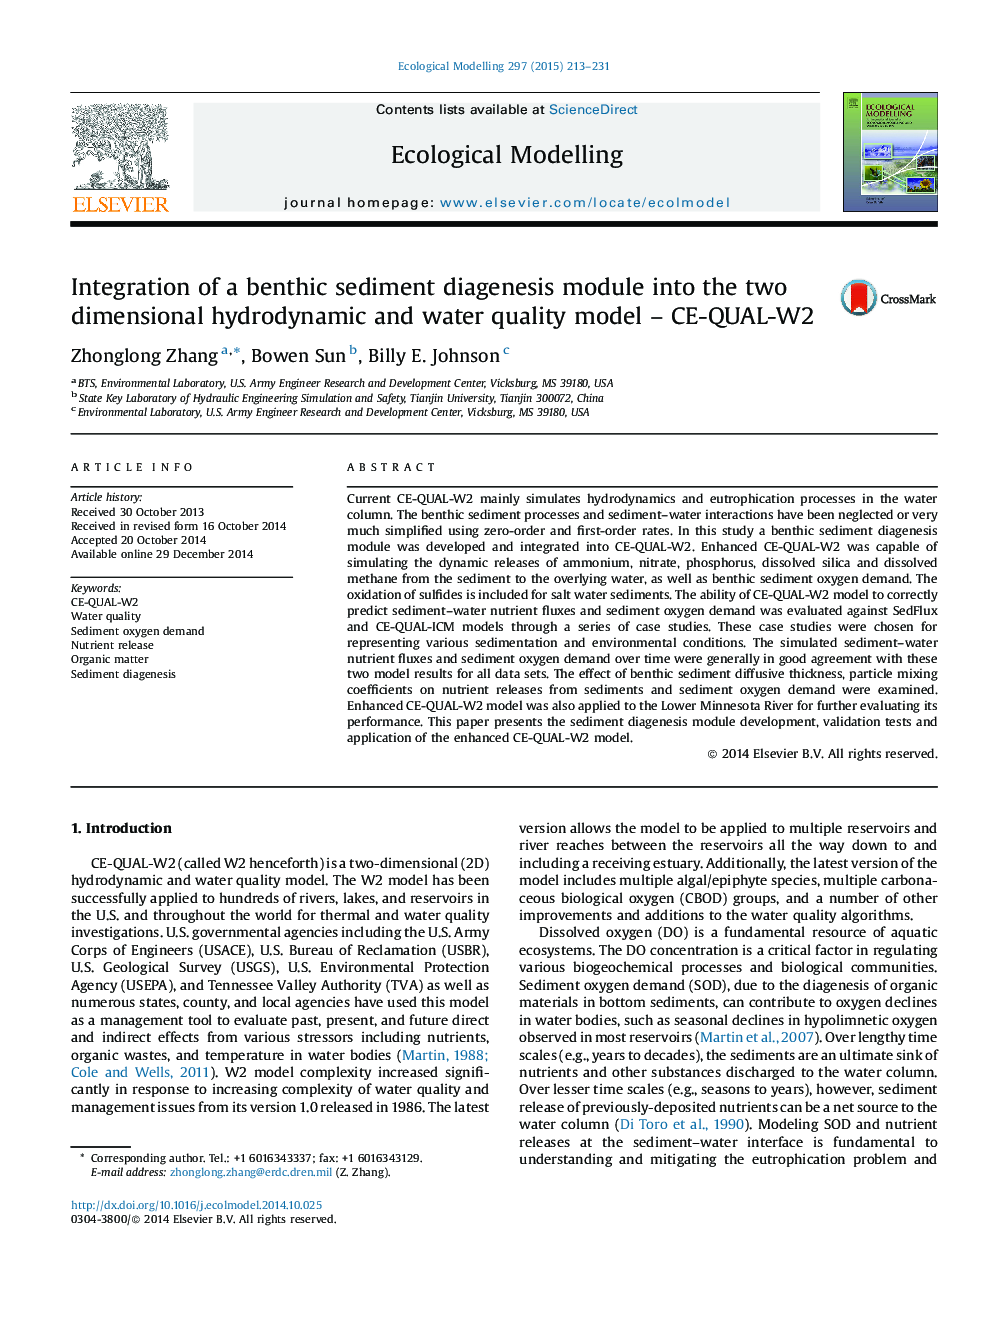 Integration of a benthic sediment diagenesis module into the two dimensional hydrodynamic and water quality model - CE-QUAL-W2